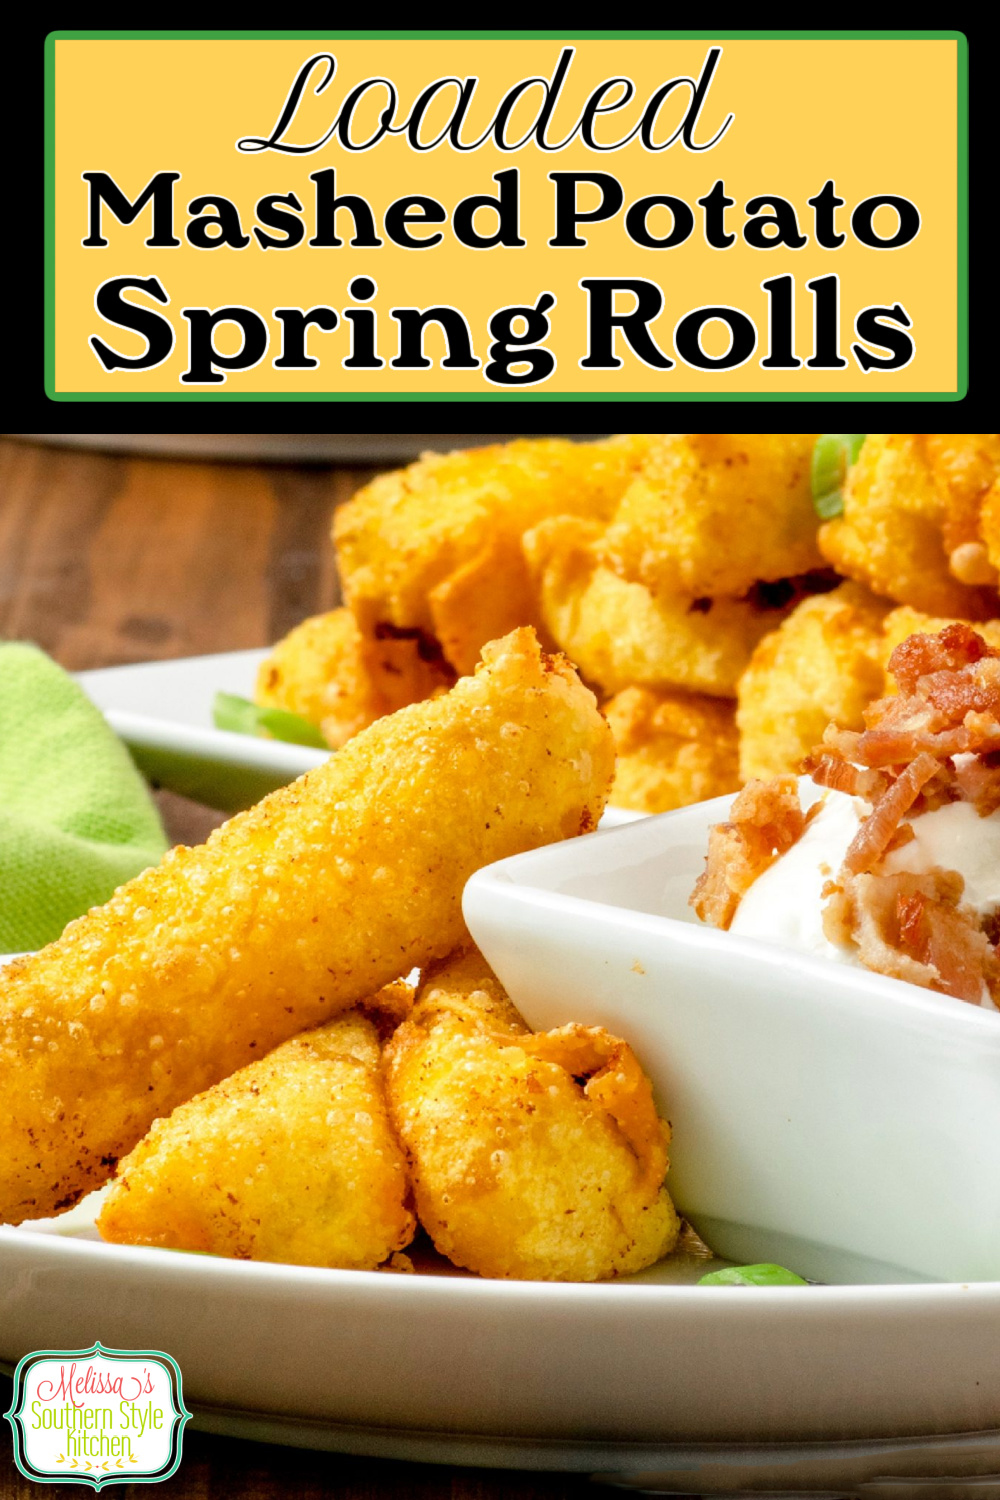 These crispy Loaded Mashed Potato Spring Rolls are a next level option to add to your appetizer menu served with sour cream for dipping #springrolls #wontons #wontonwrappers #loadedmashedpotatoes #mashedpotatorecipes #loadedmashedpotatospringrolls #springrolls via @melissasssk